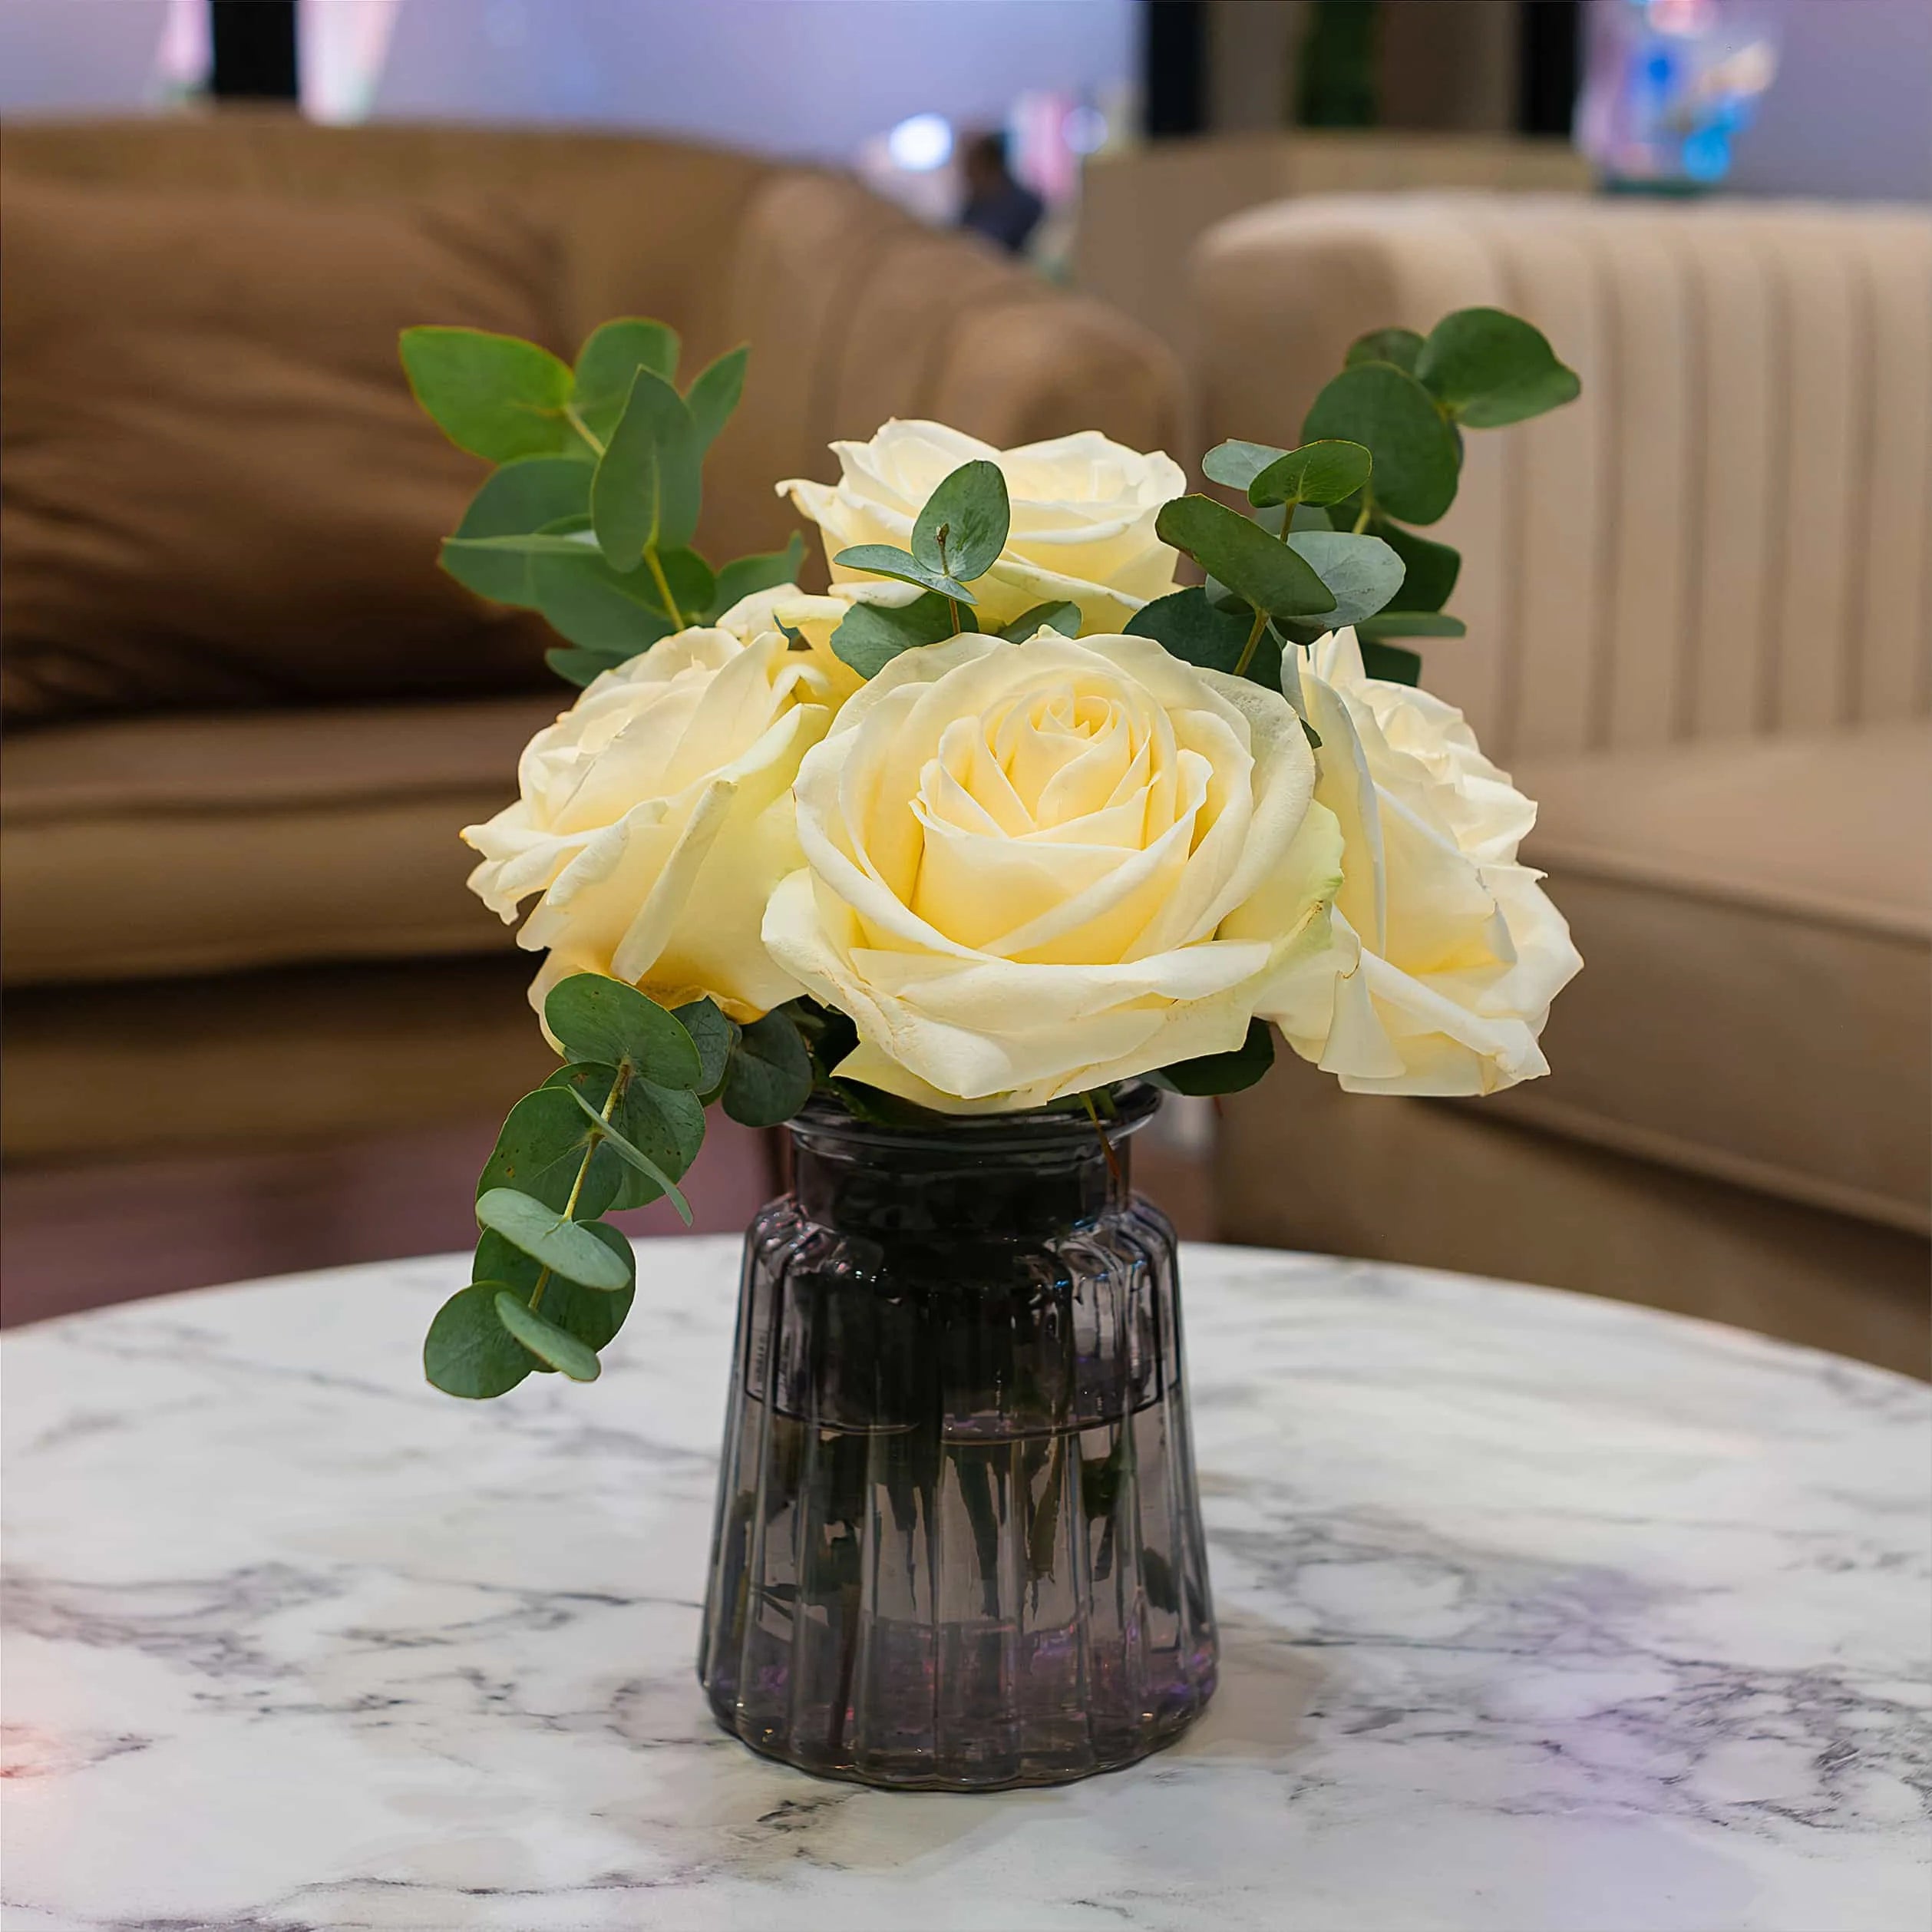 This is a close-up view of a bouquet of delicate yellow roses in a dark glass vase gracing a white marble table at WTM in London.